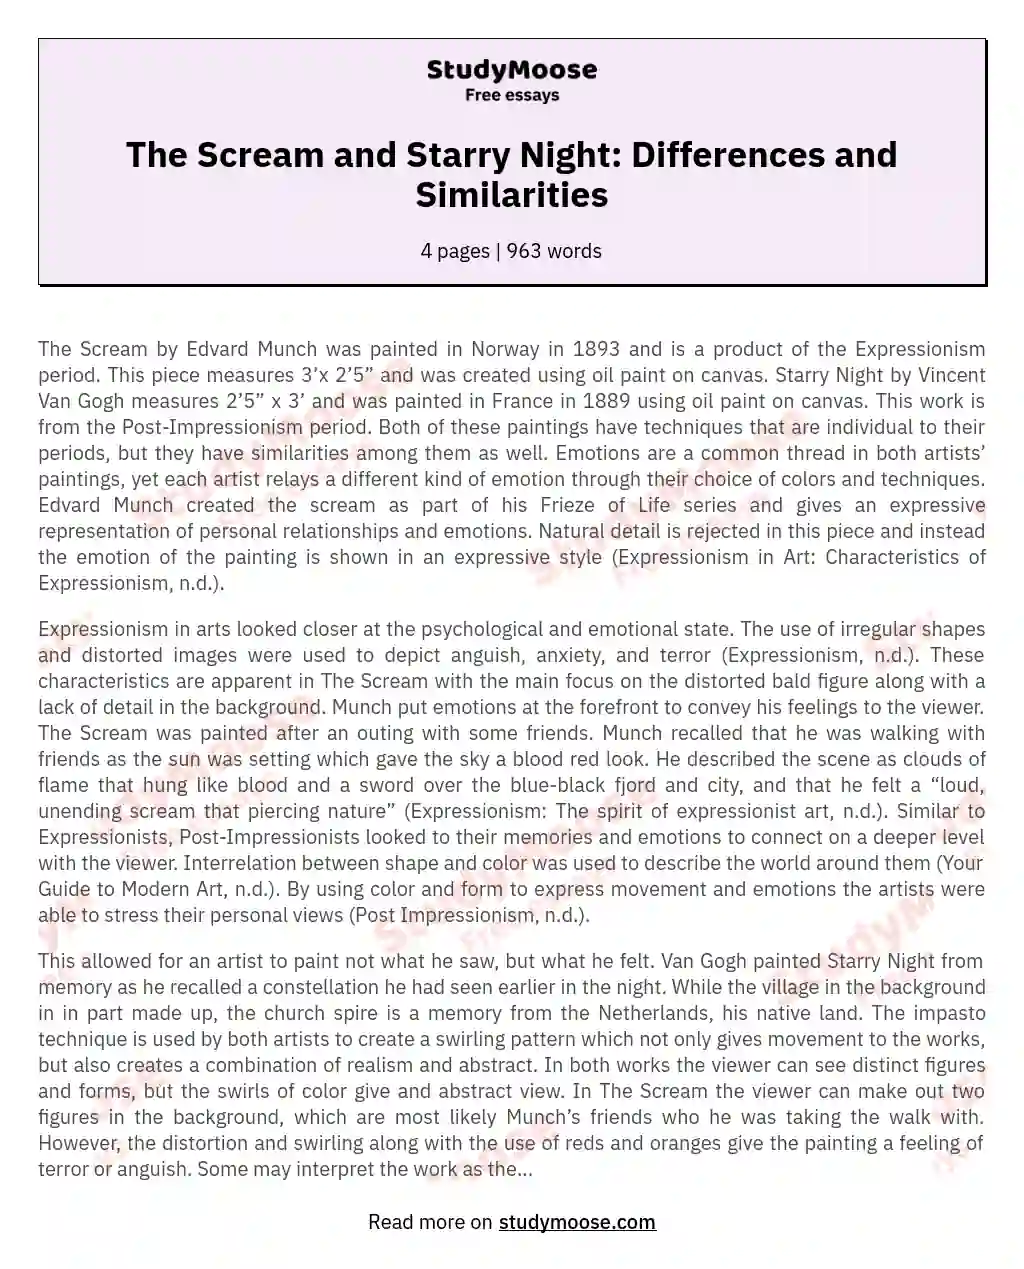 The Scream and Starry Night: Differences and Similarities essay